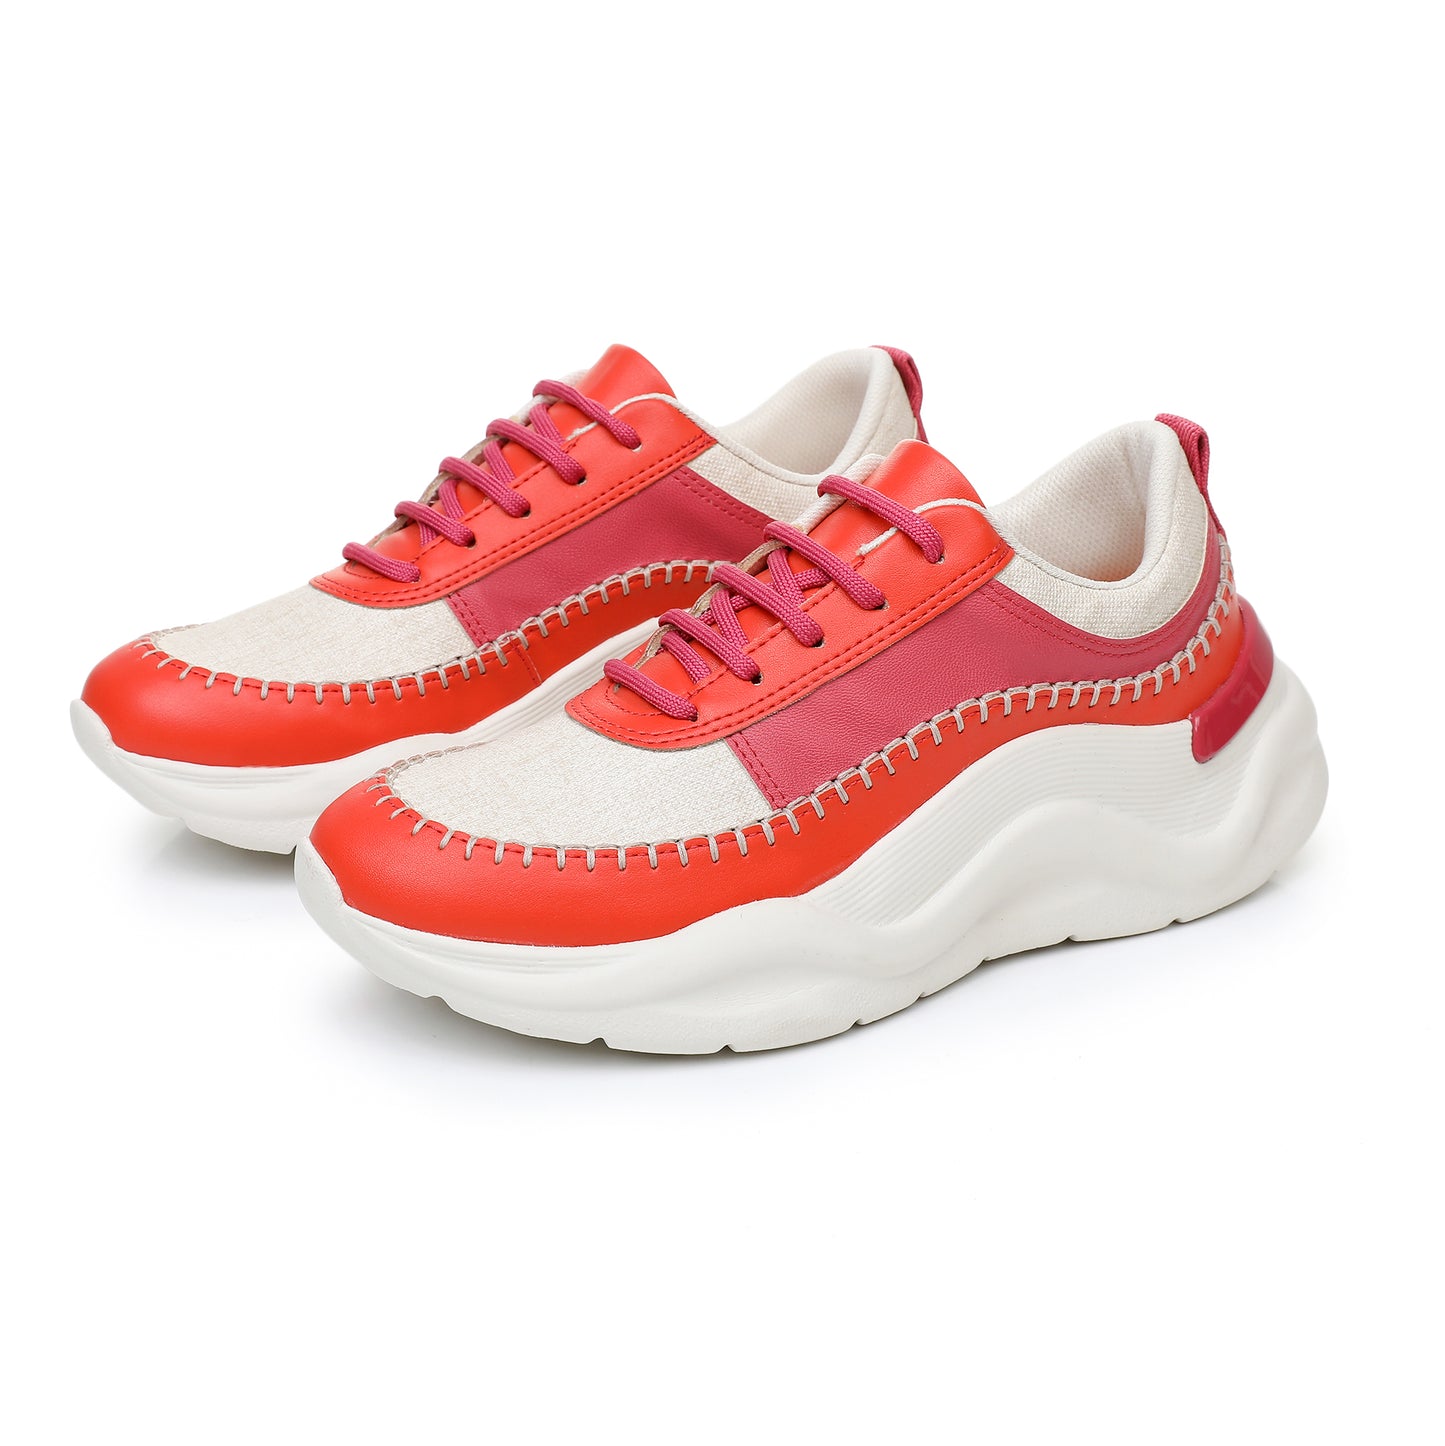 City Beat Chunk Sneakers - Pink & Coral (939.005)